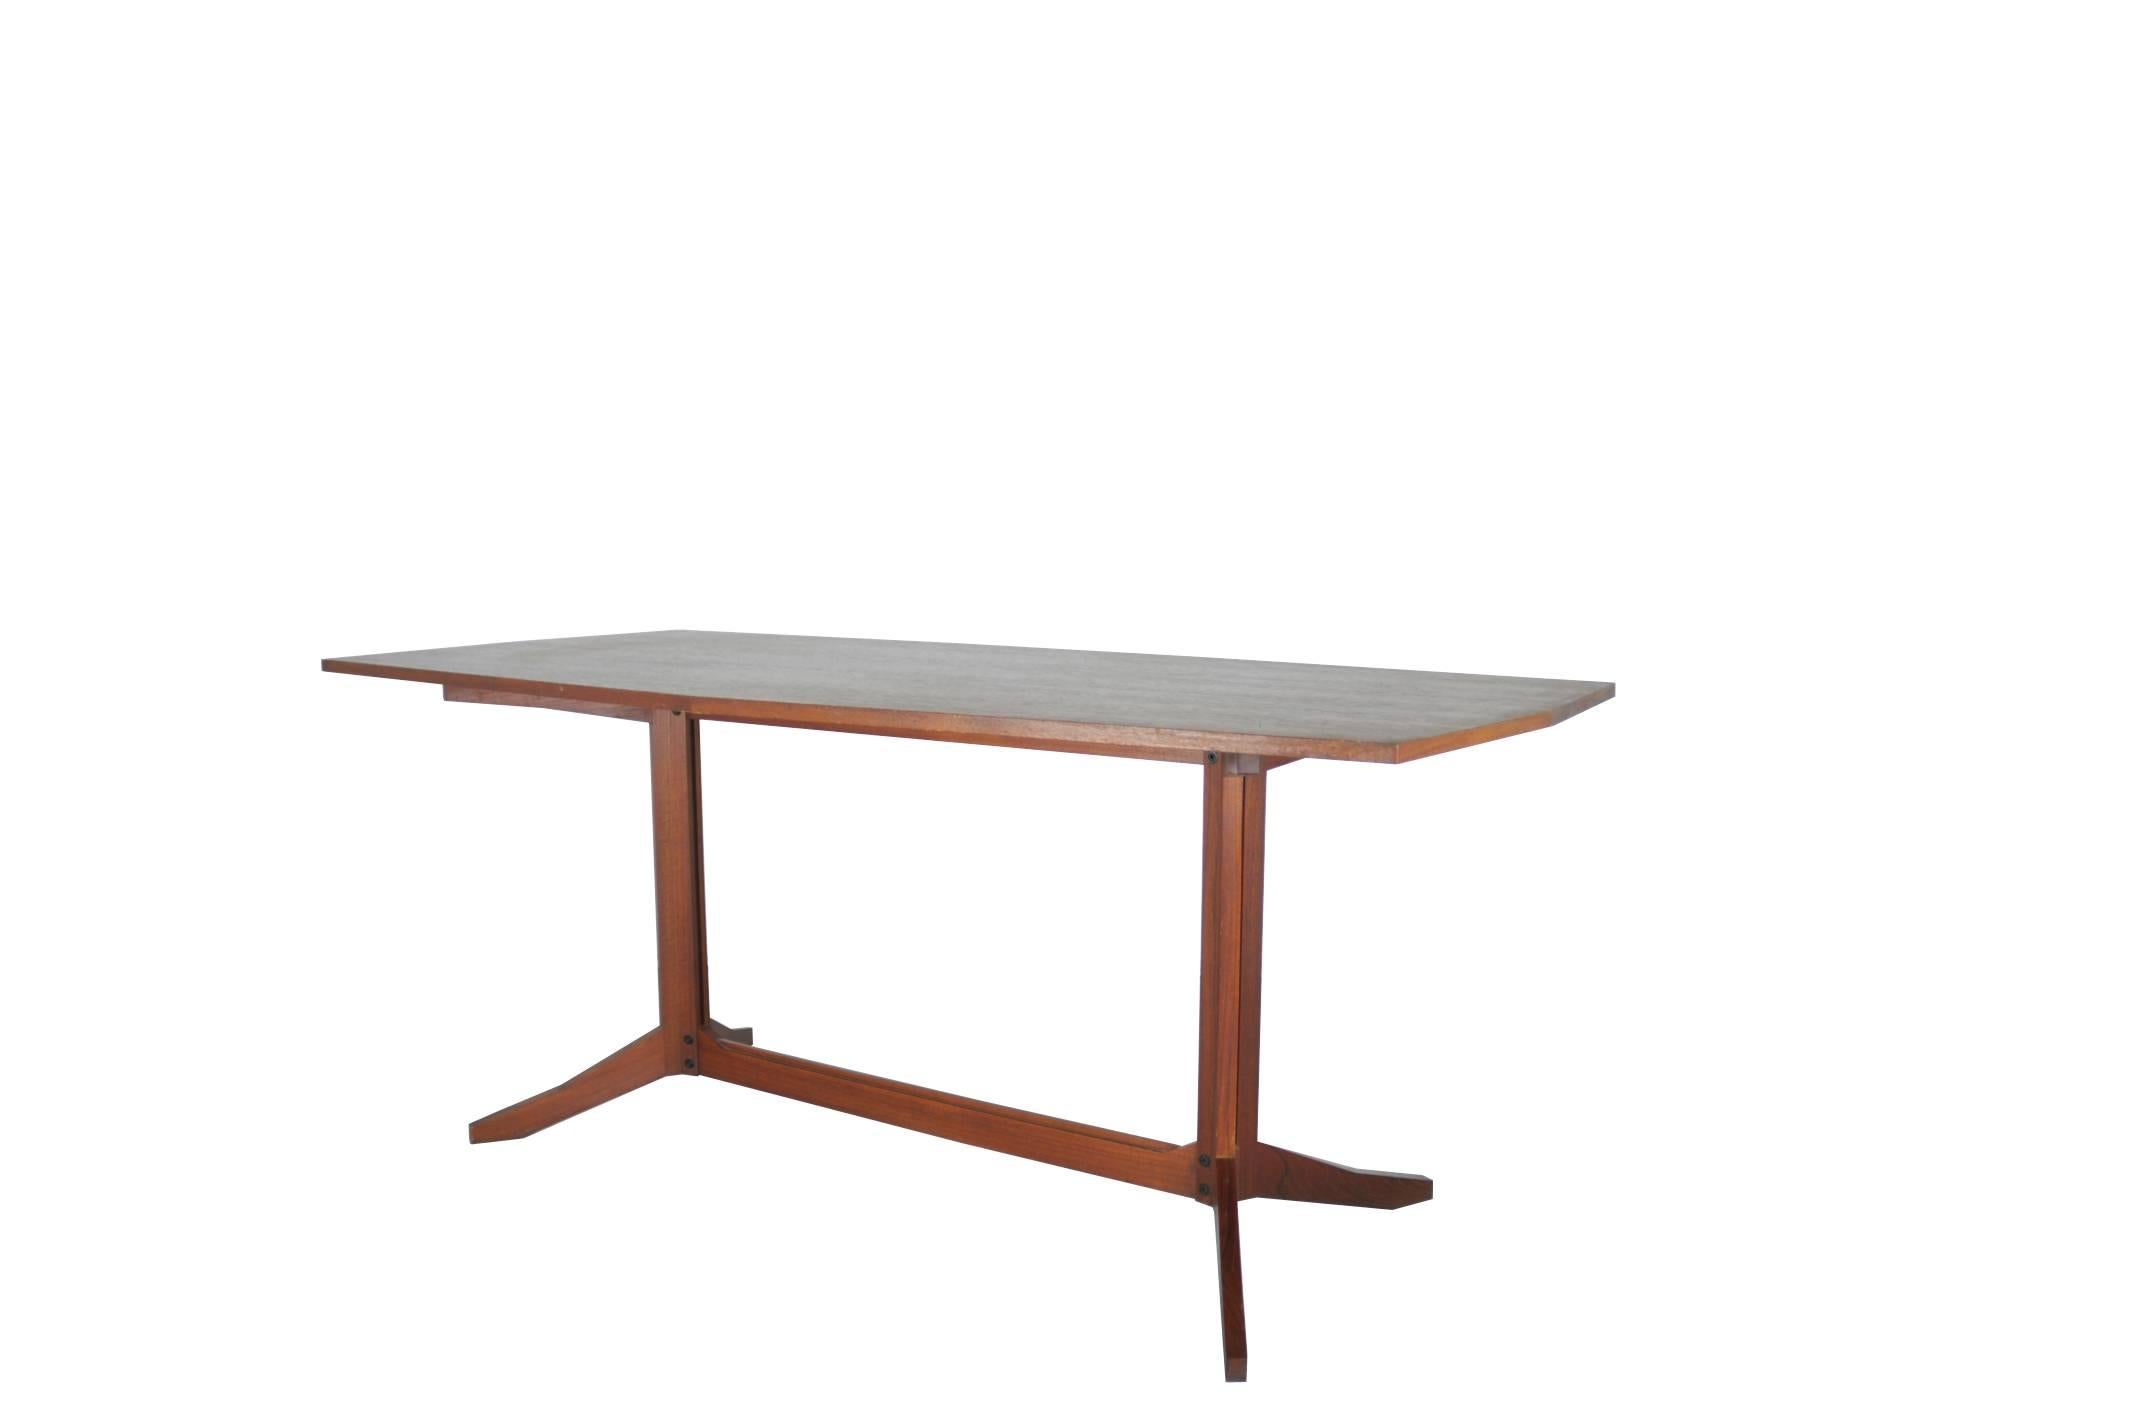 A beautiful teak table manufactured by Roberto Poggi and attributed to Franco Albini. It remains in a very good vintage condition: signs of wear and use as showed in pictures.